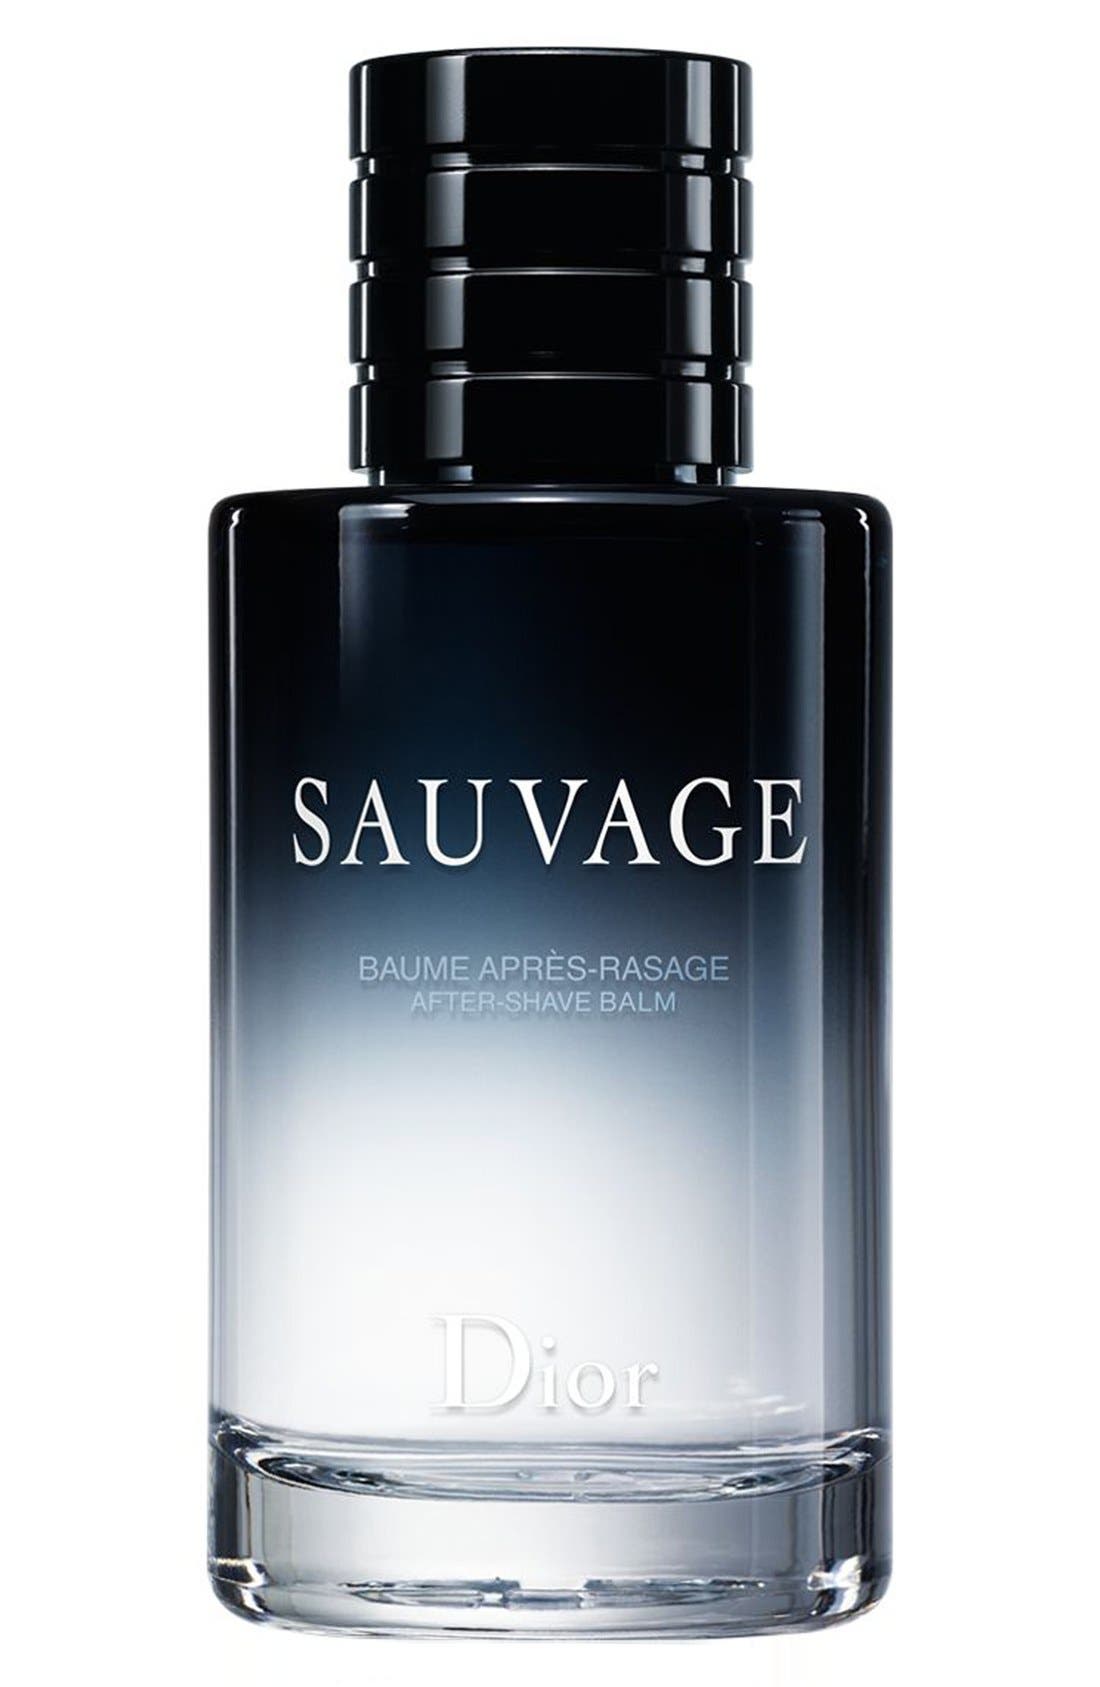 sauvage aftershave offers